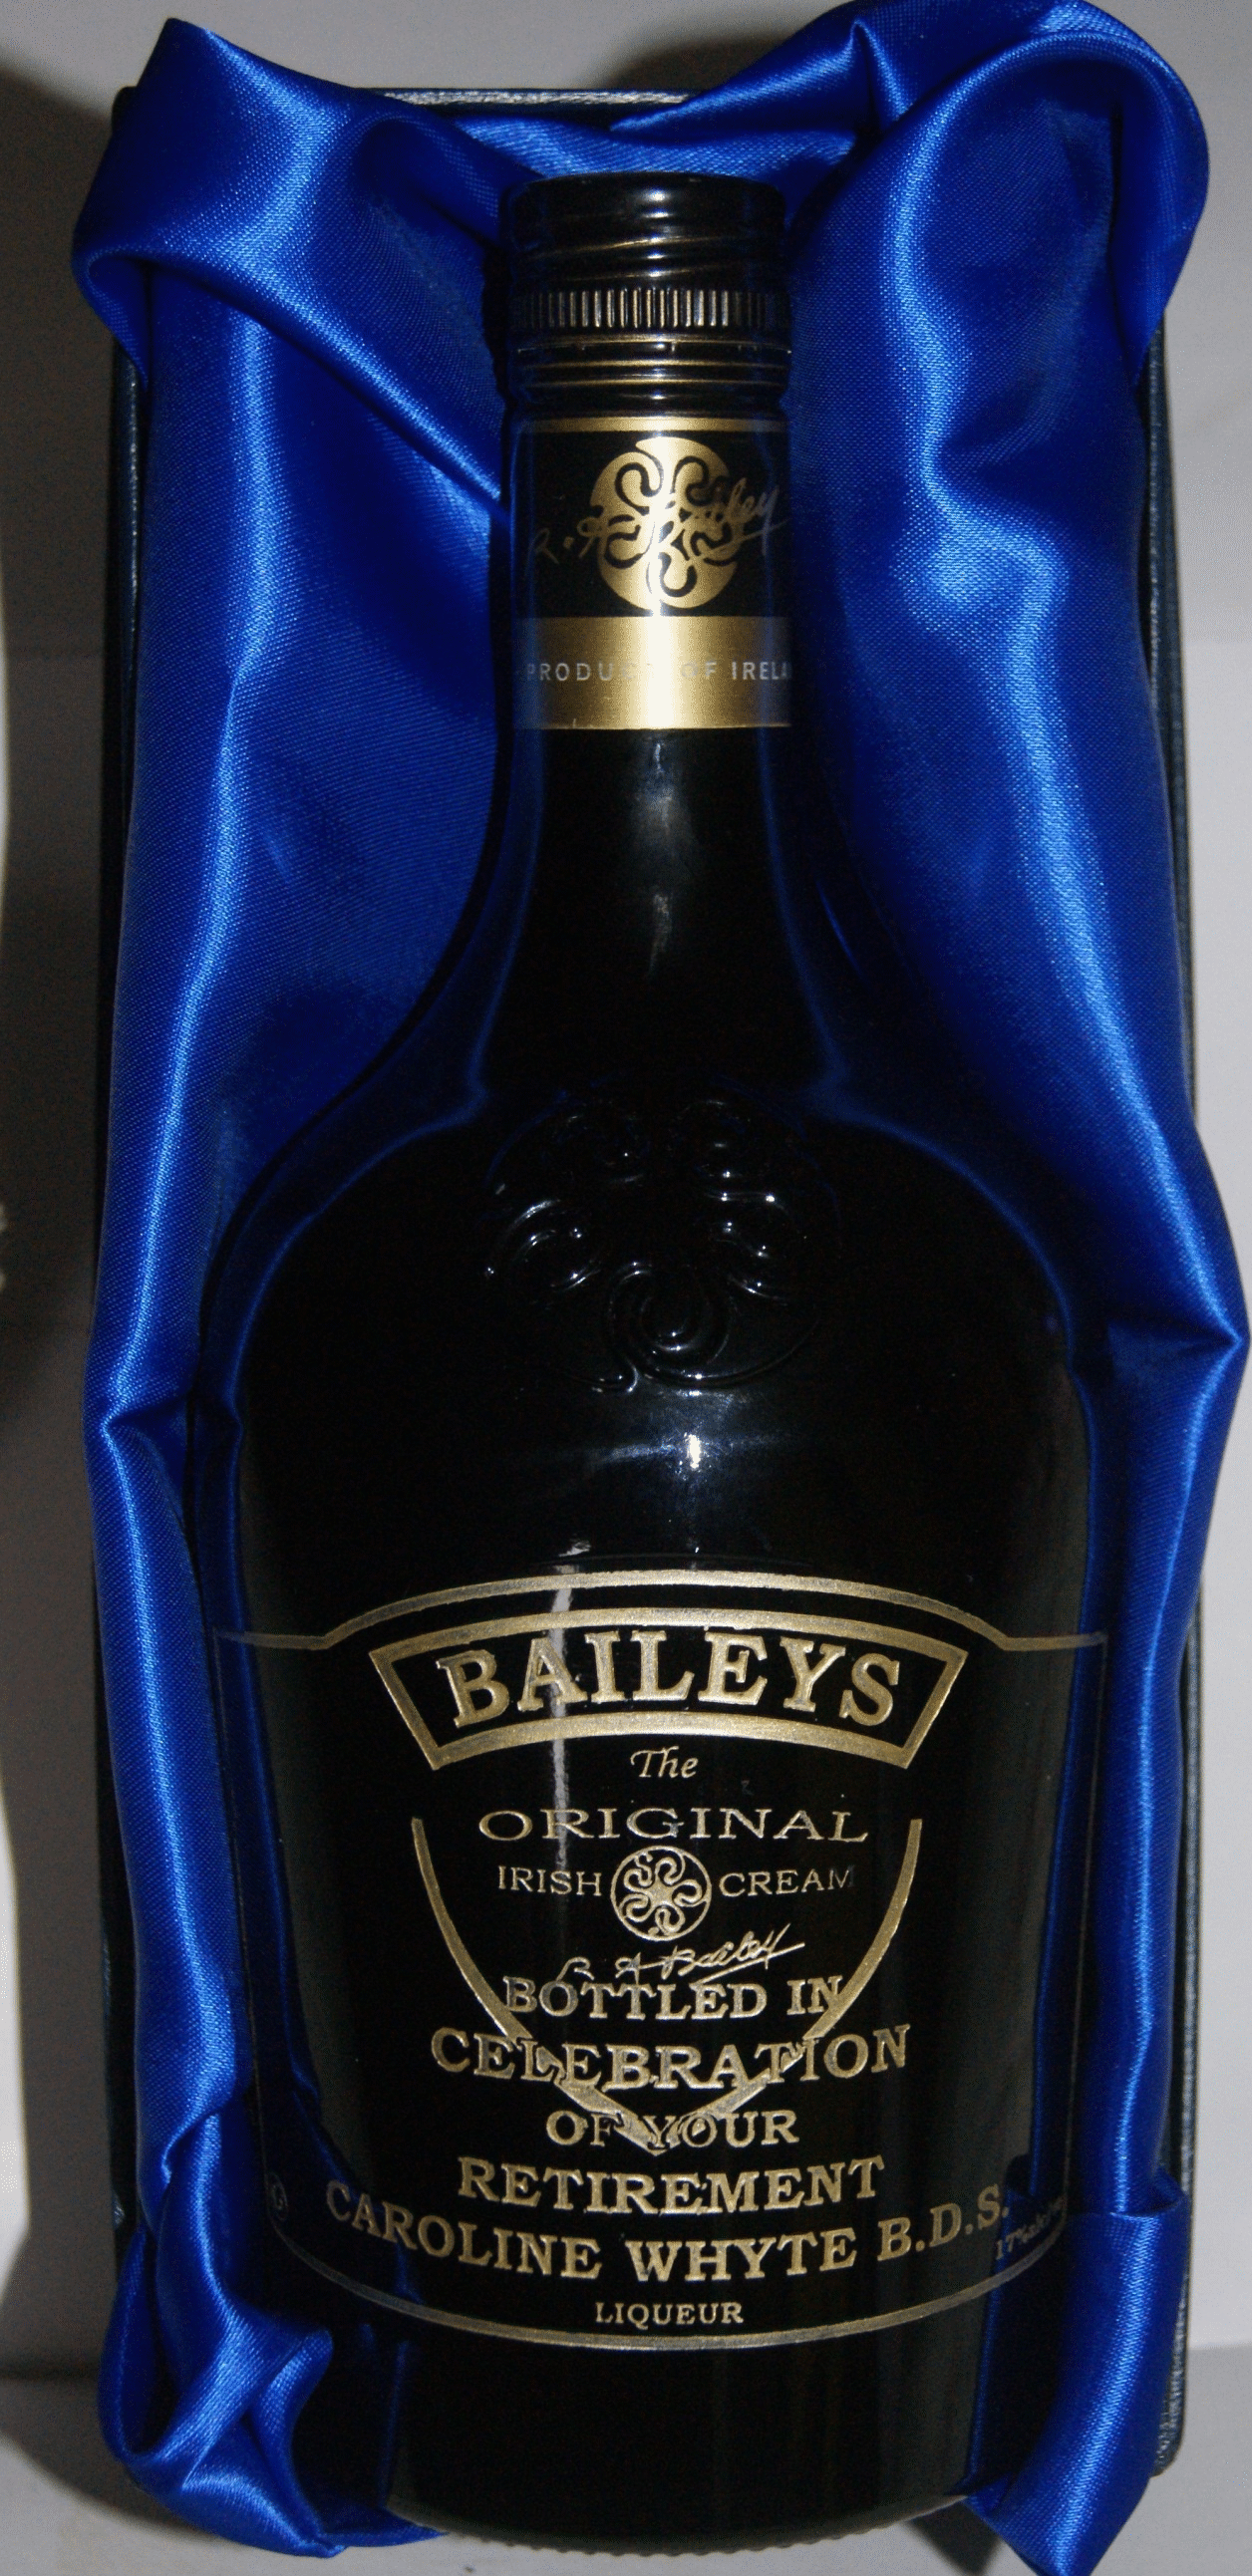 A bottle of Baileys engraved by sandblasting after which the engraving is filled with gold paint.